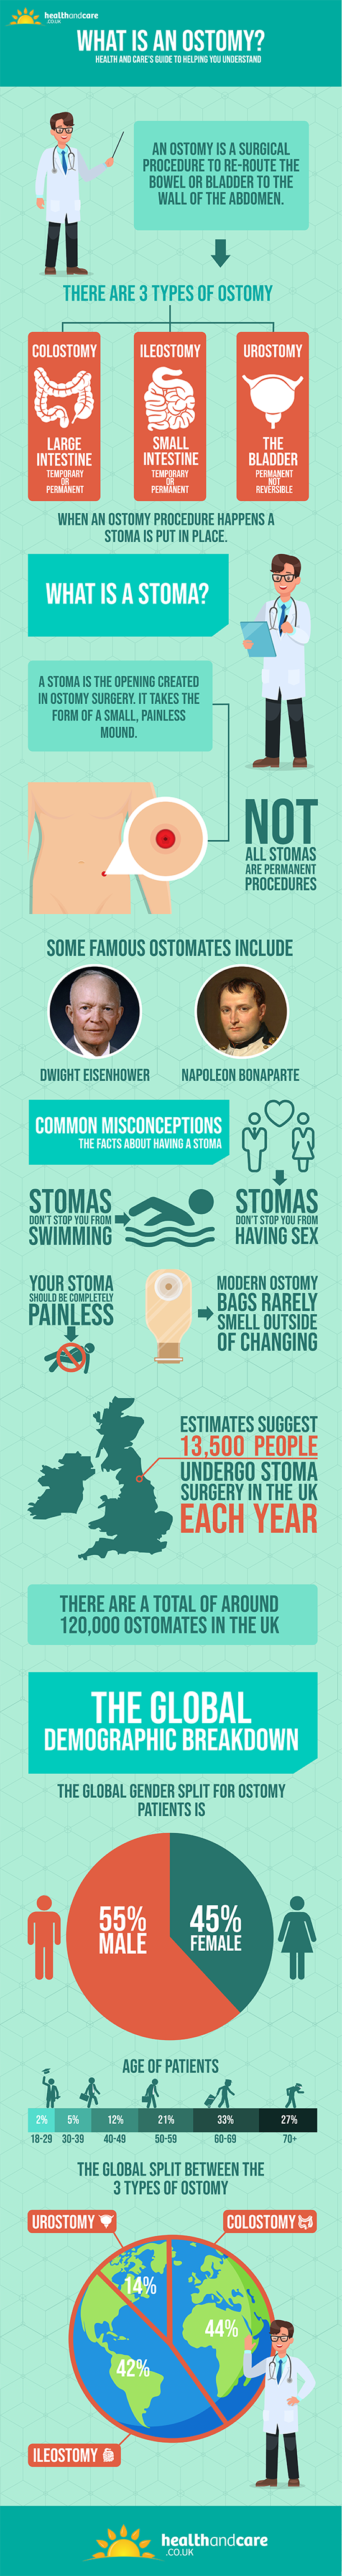 A Health and Care Crash Course in All Things Ostomy